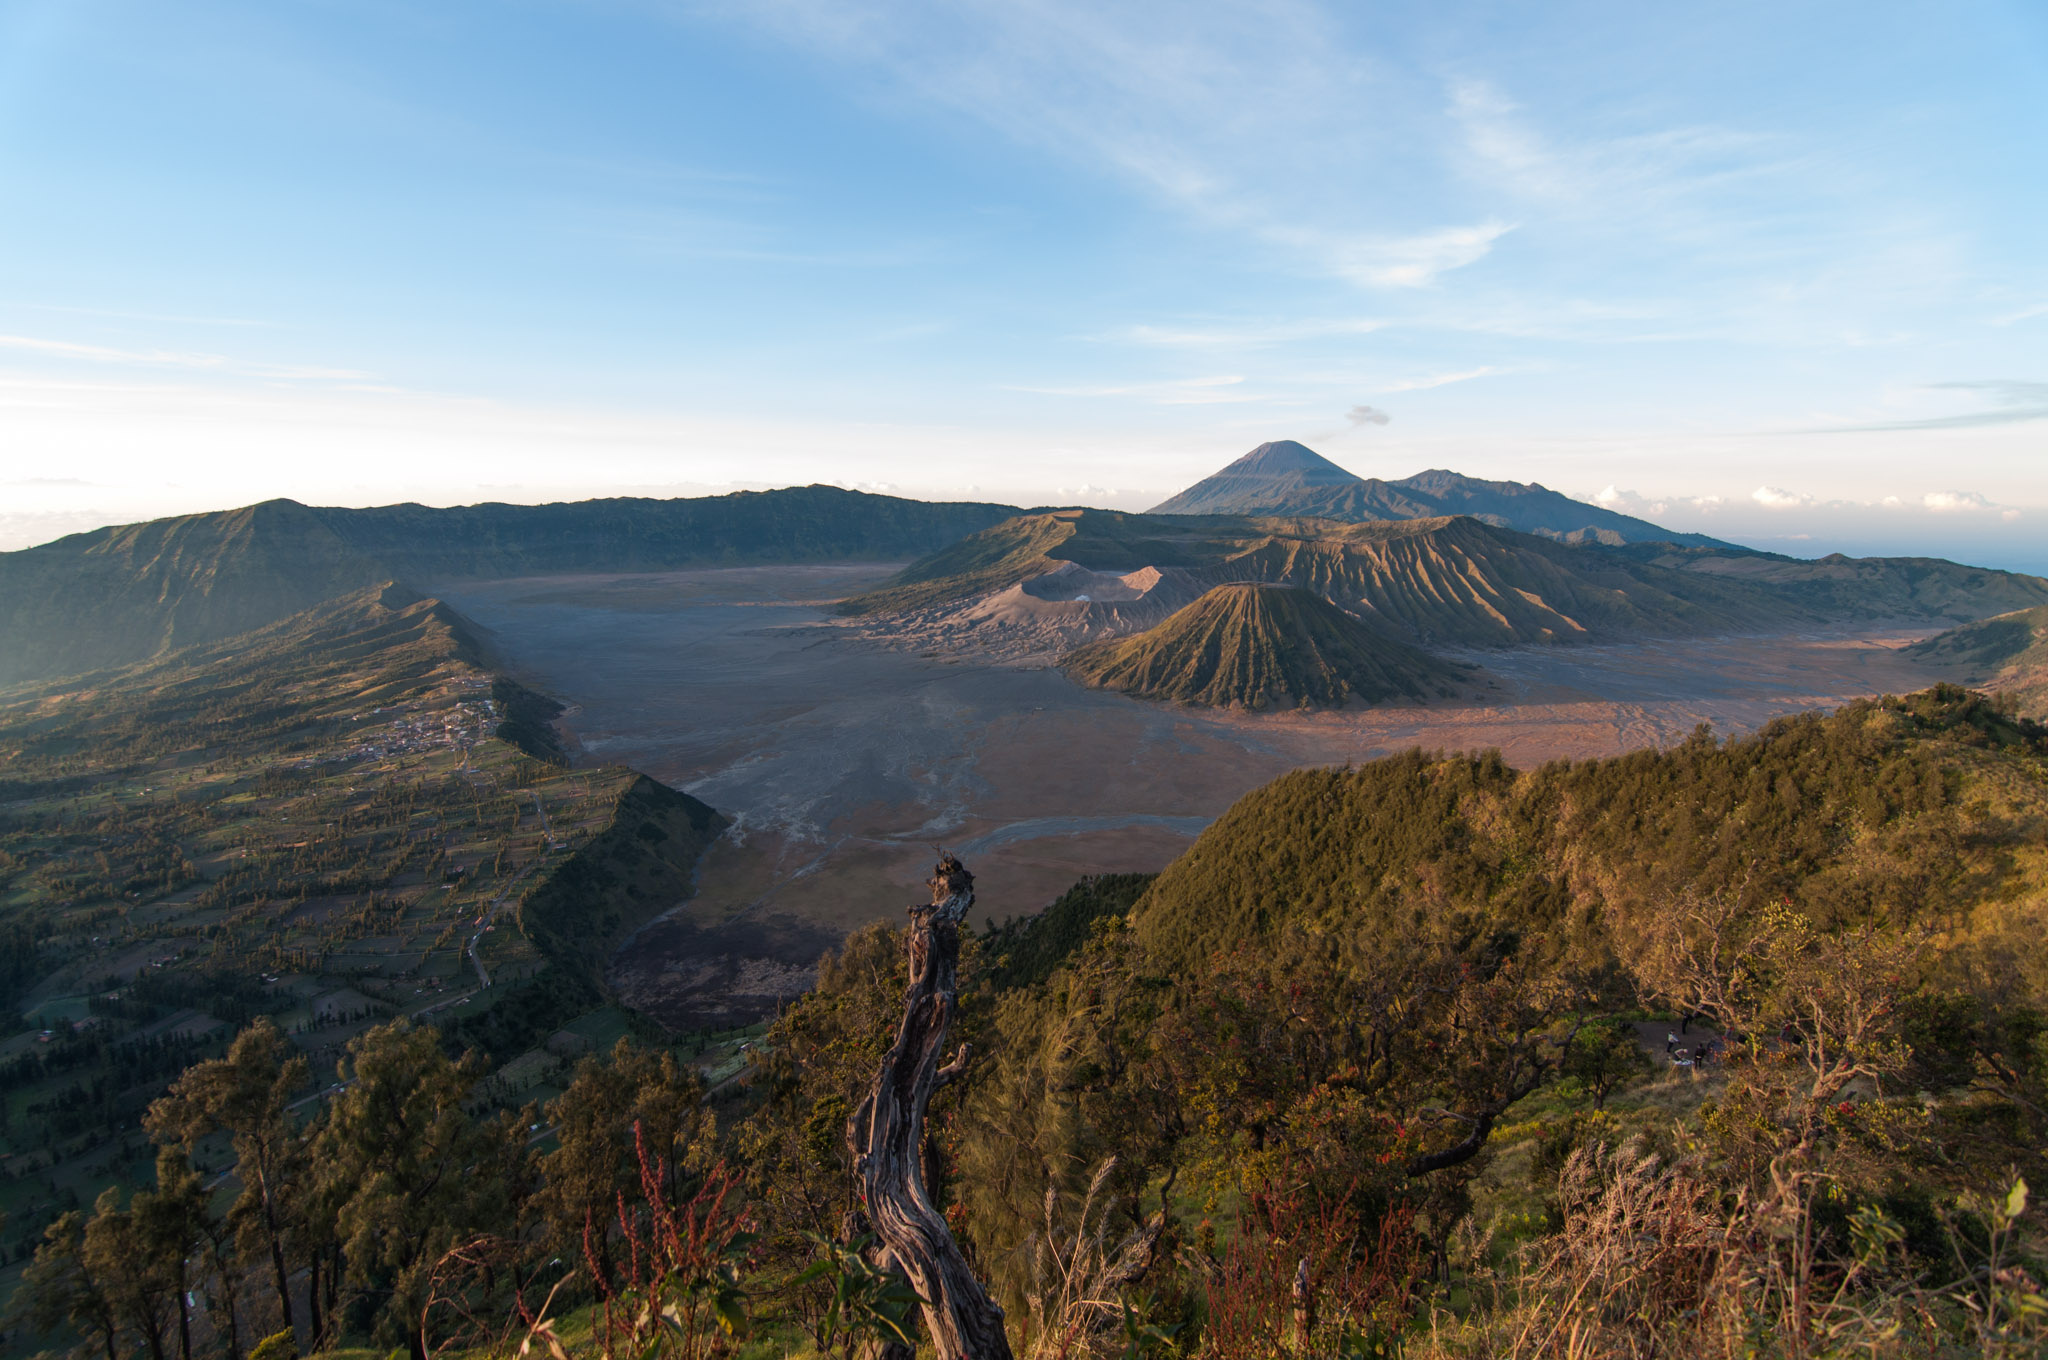 Mountain Bromo is Magnificent Wonder of Nature - YourAmazingPlaces.com